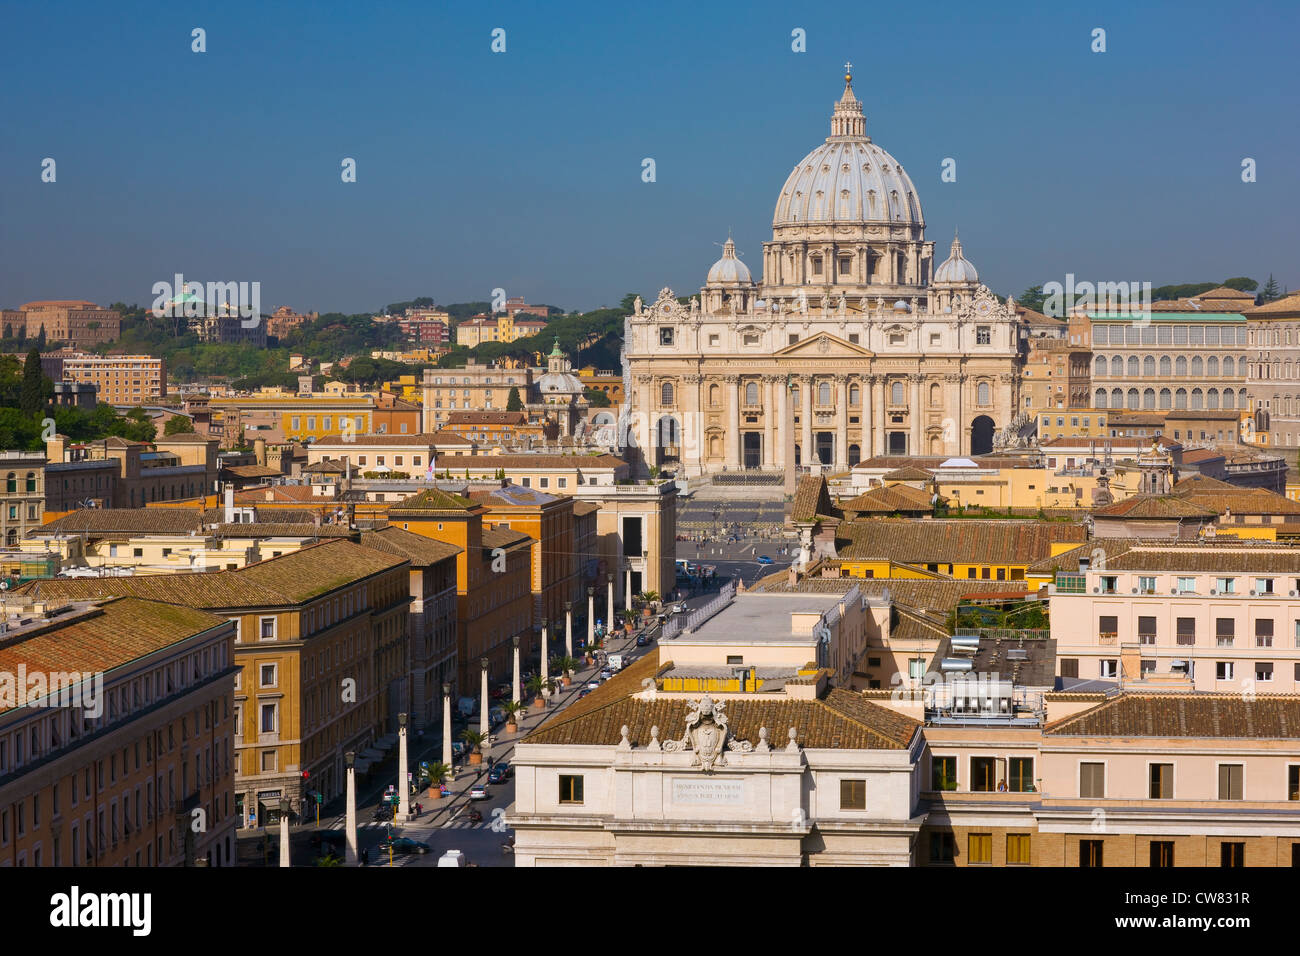 Elevated view of Vatican City and Saint Peter's Basilica, Rome, Italy Stock Photo